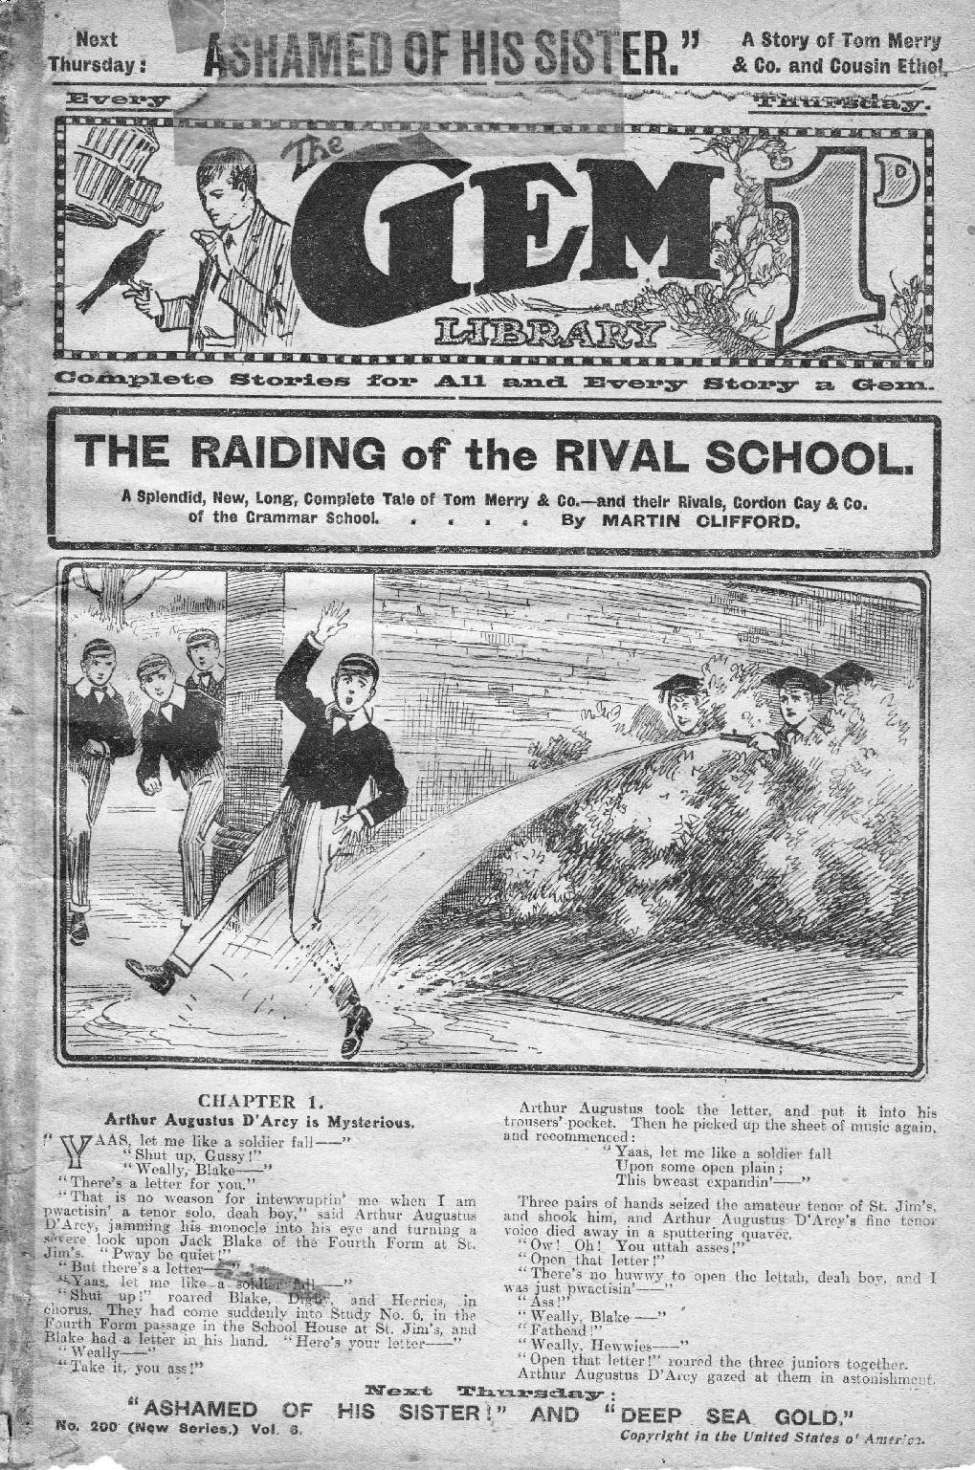 Comic Book Cover For The Gem v2 200 - The Raiding of the Rival School